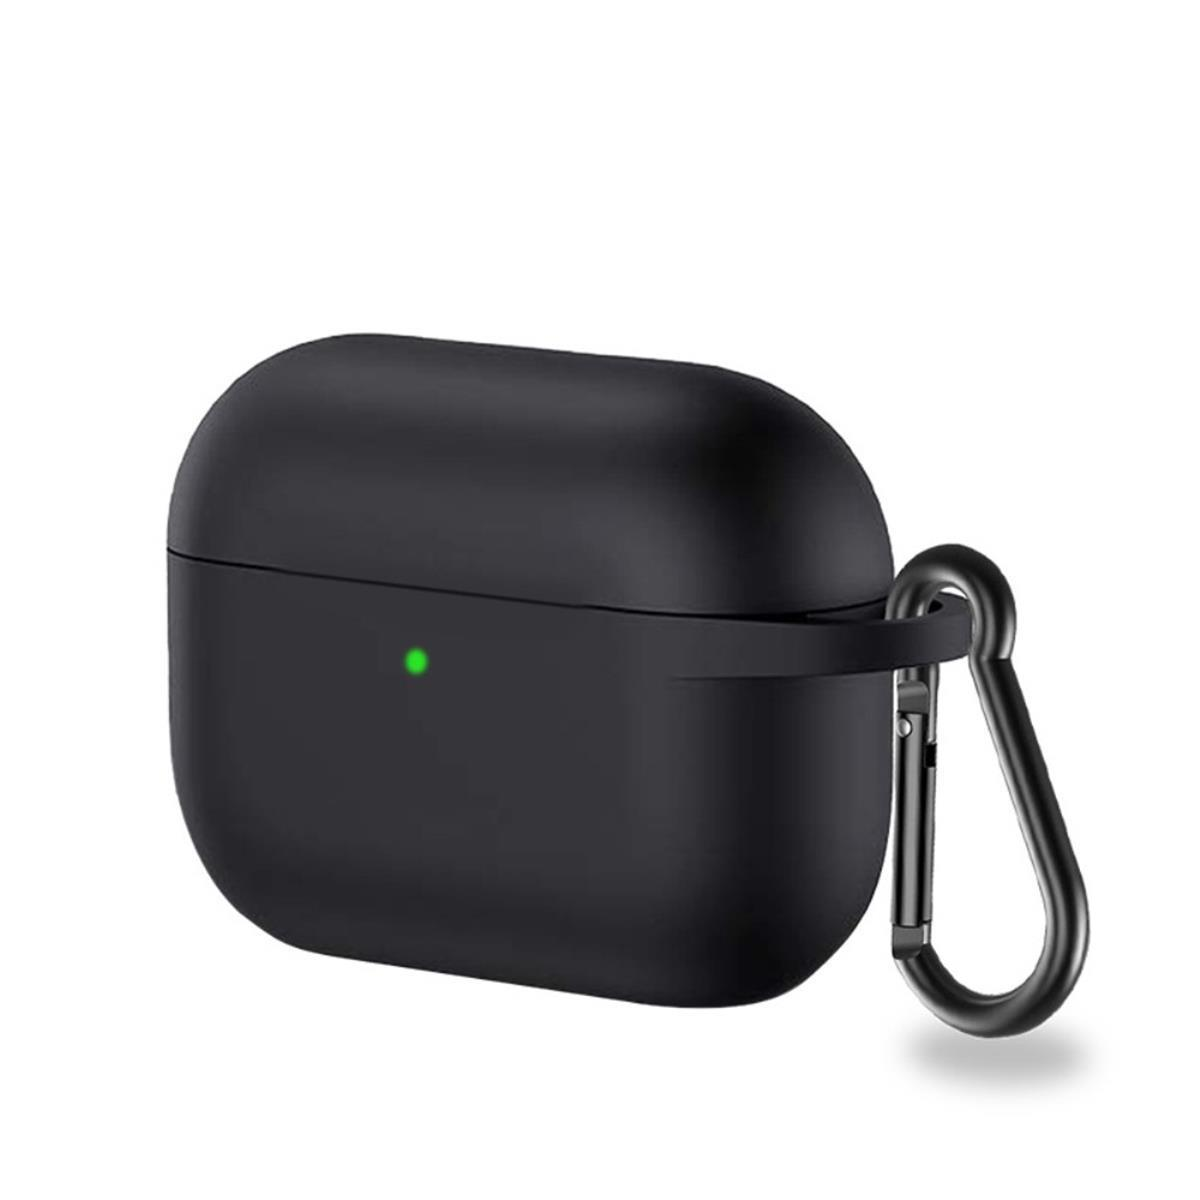 COVERKINGZ Silikoncover 75422 Unisex, Schwarz, Apple AirPods Pro Ladecase für